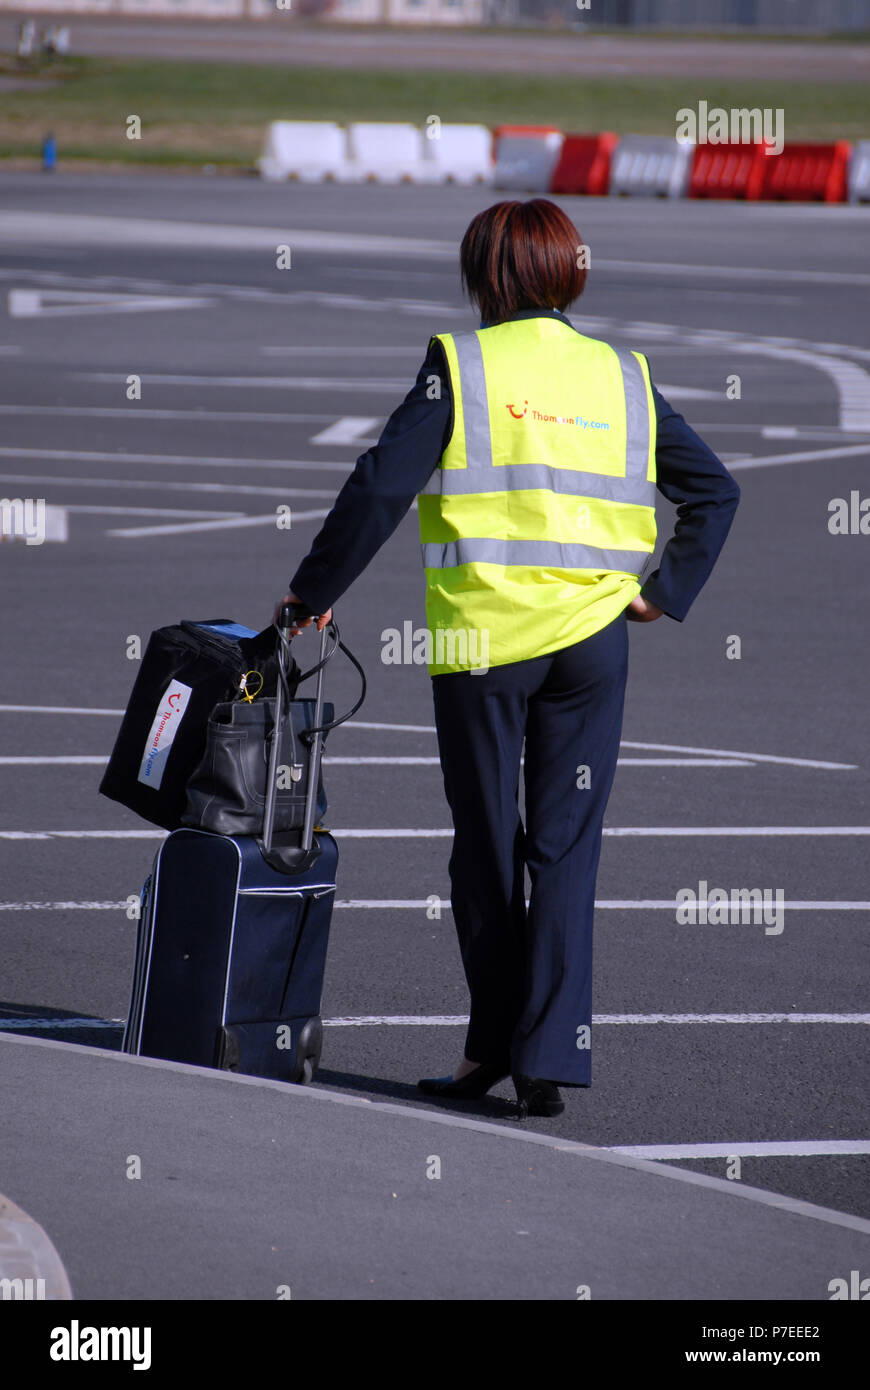 Airline staff waiting on tarmac to board plane at Doncaster Sheffield Airport, formerly named Robin Hood Airport Doncaster Sheffield, Stock Photo